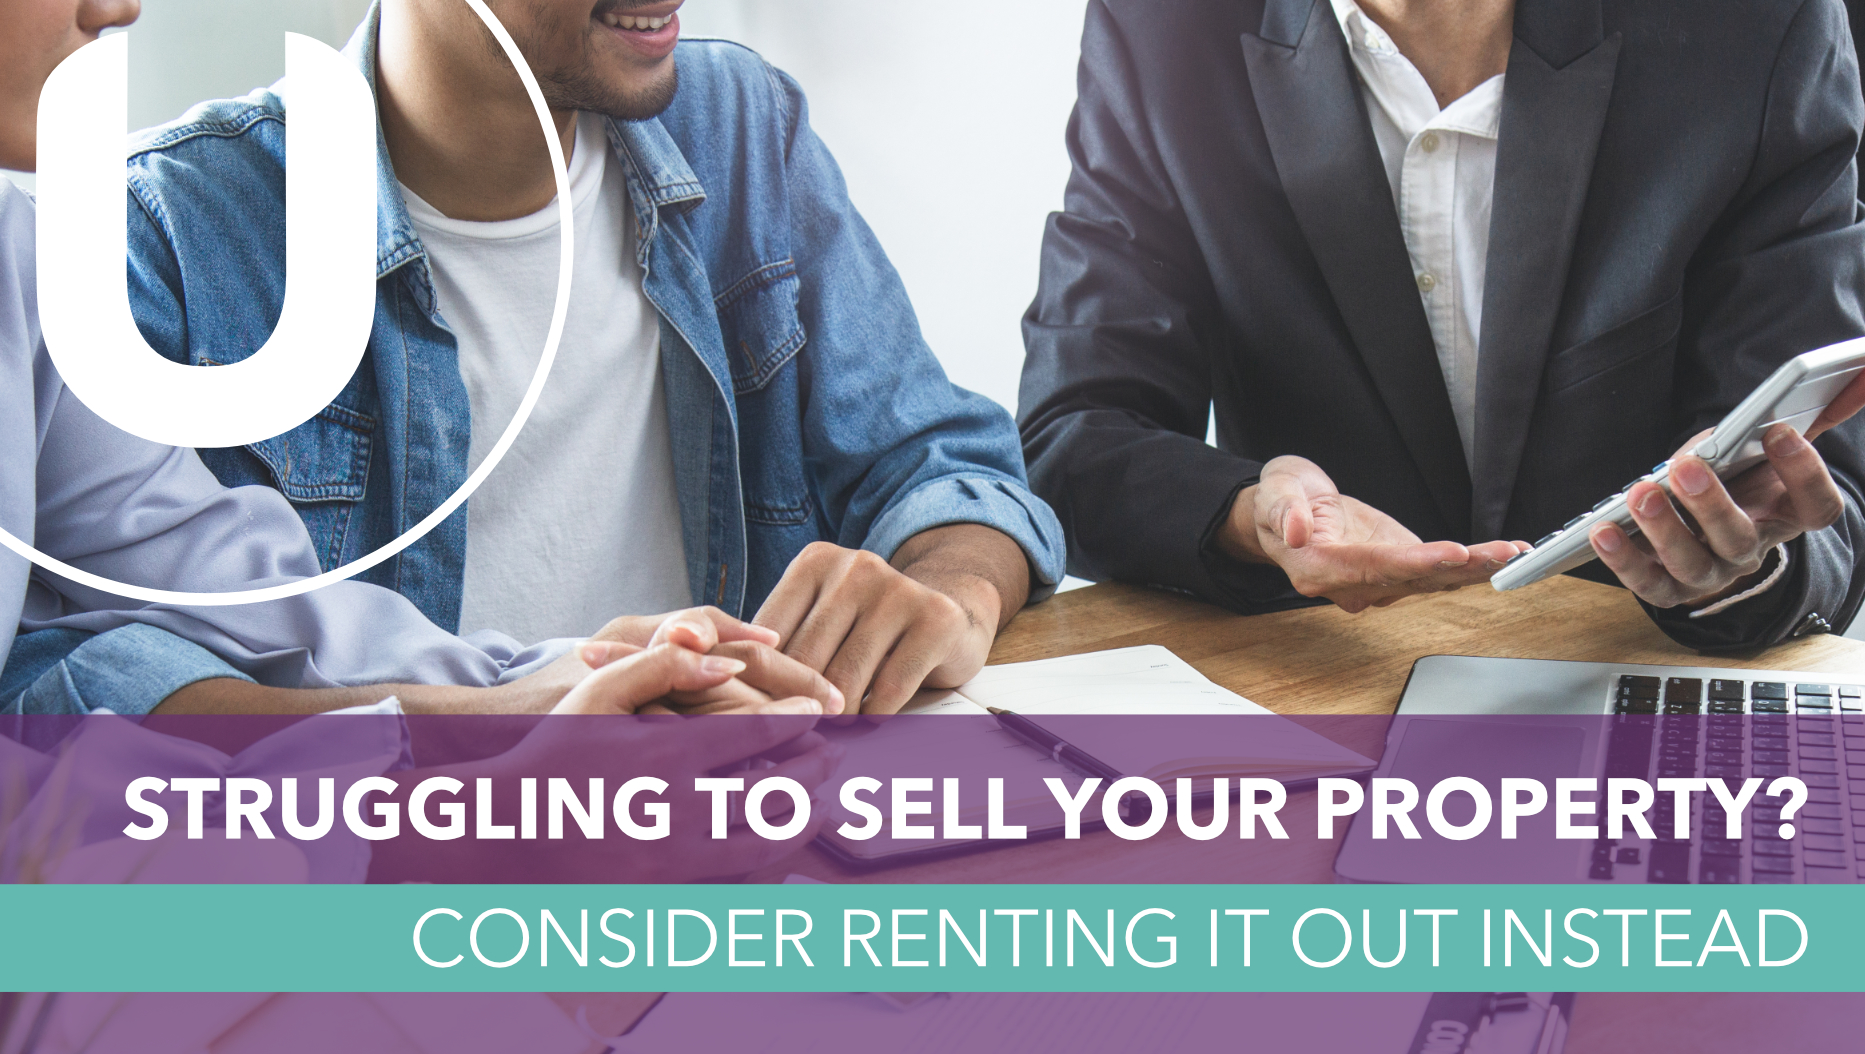 Cant sell or don’t want to sell your property? Consider renting it out instead